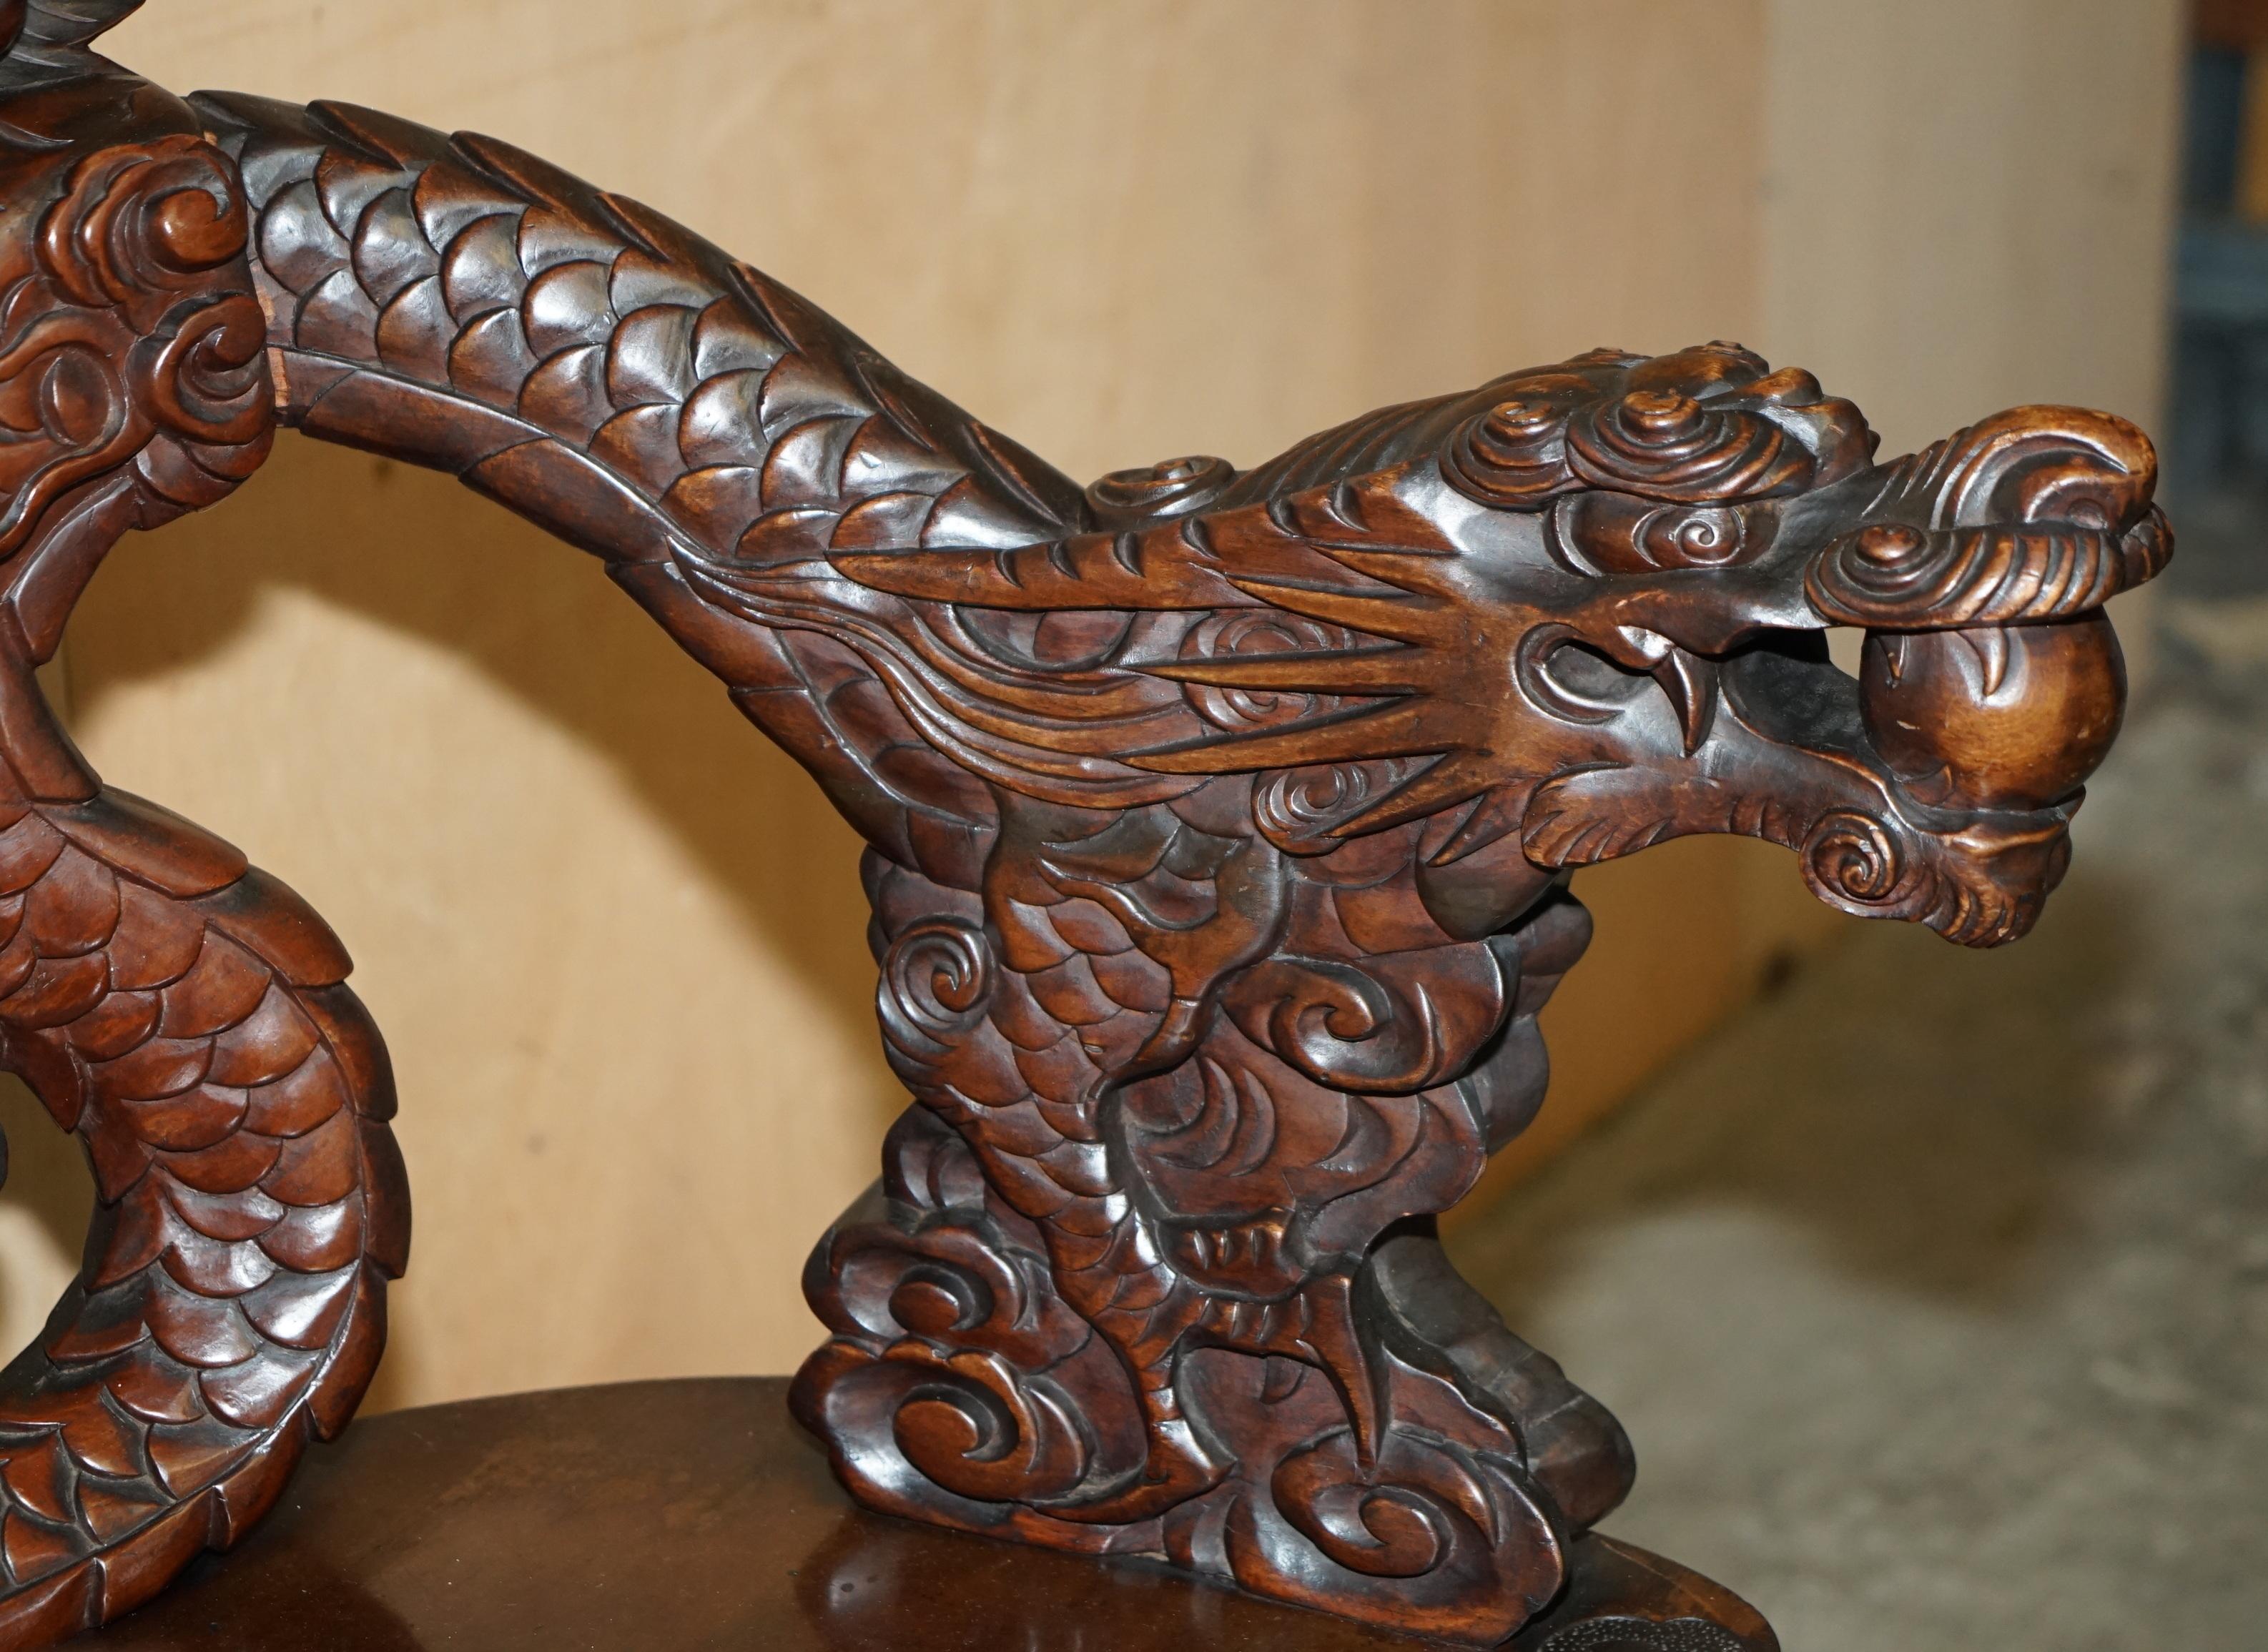 EXQUISITE CIRCA 1880 QING DYNASTY CARVED HARDWOOD CHINESE DRAGON ARMCHAiR For Sale 3